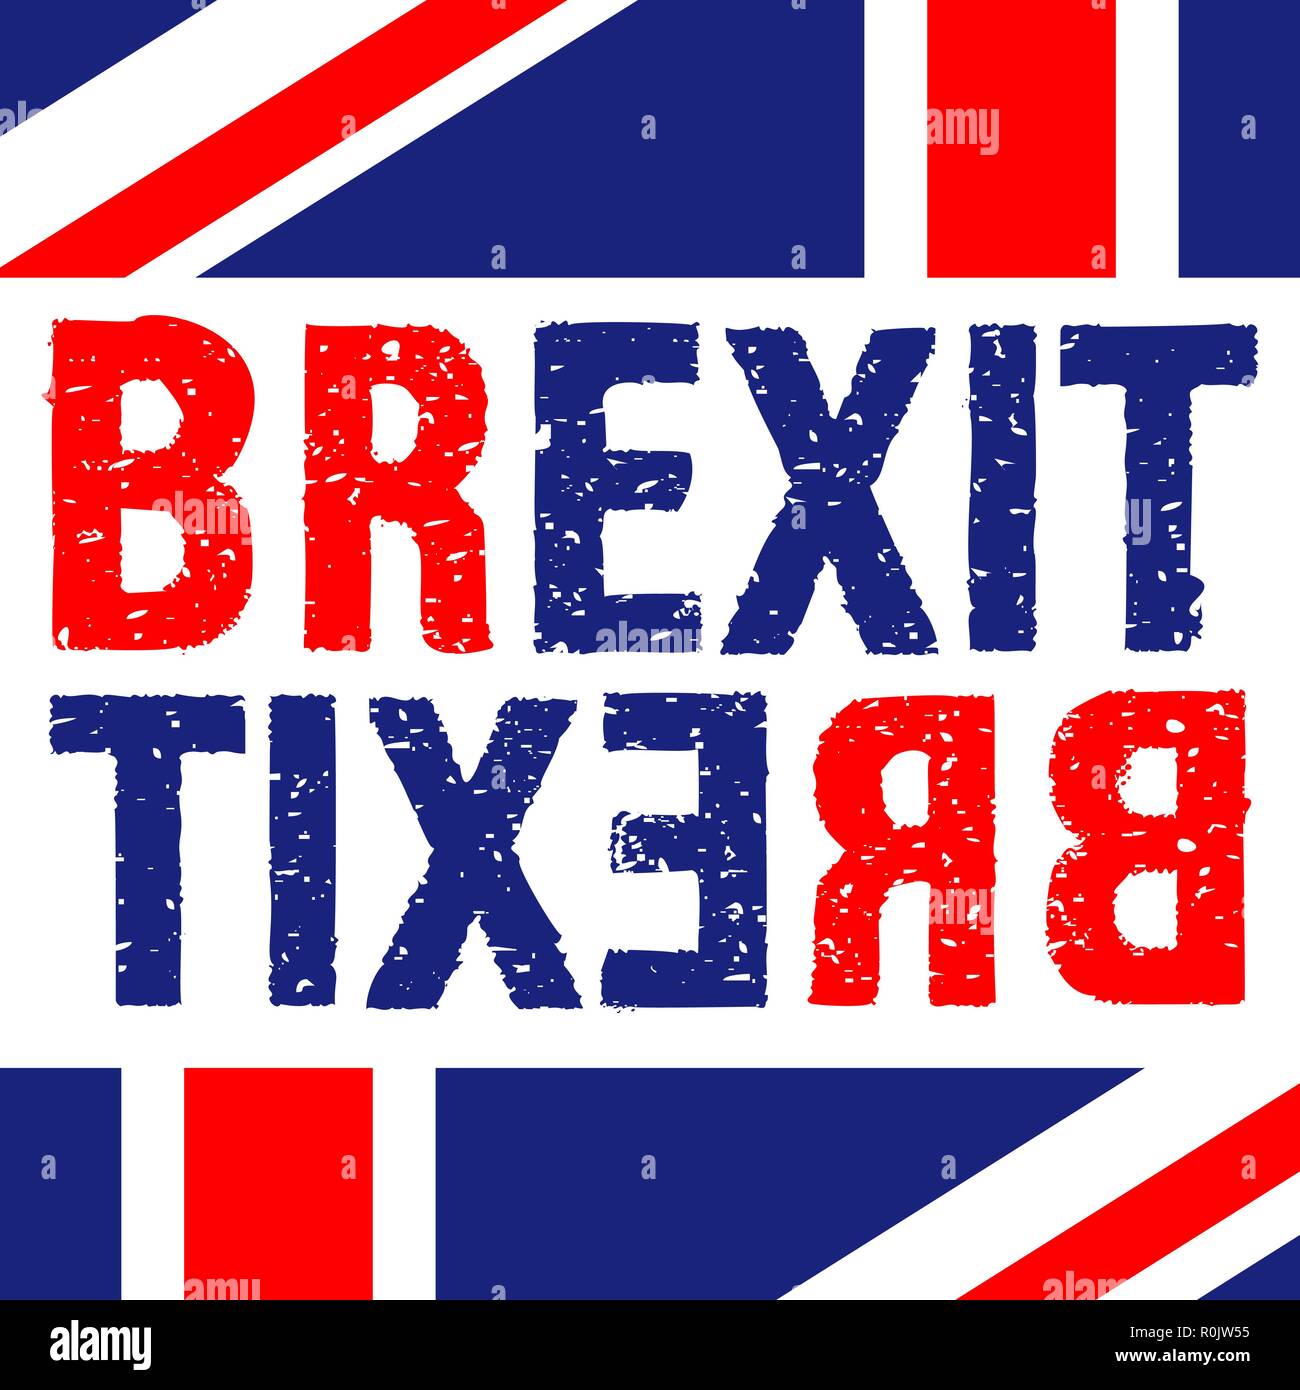 Brexit Text Isolated. United Kingdom exit from europe relative image. Brexit named politic process. Referendum theme art Stock Vector